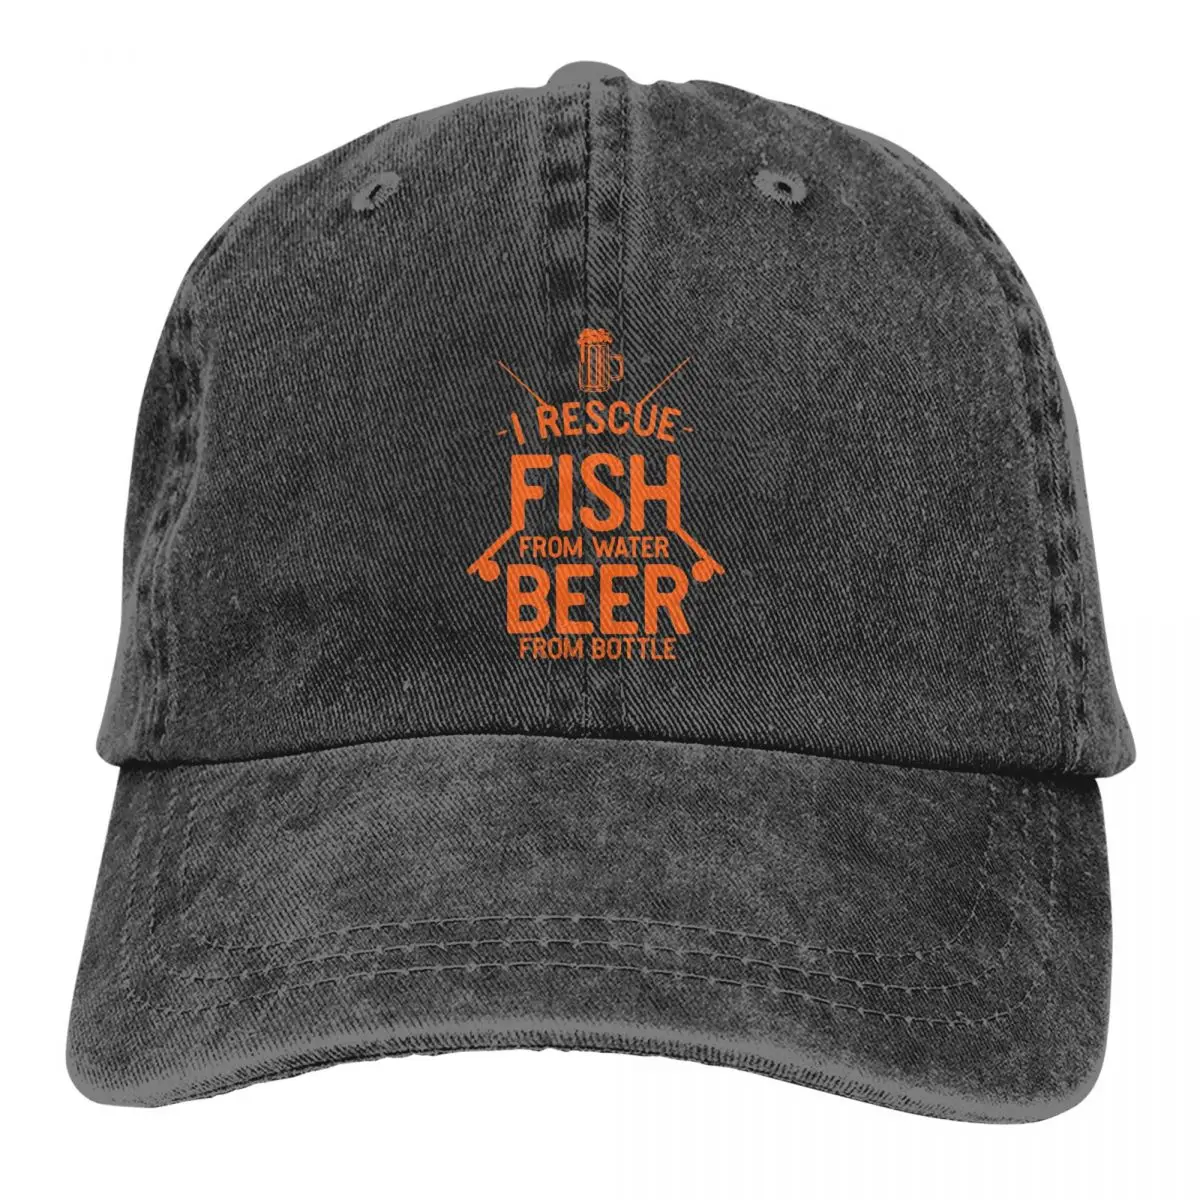 

Summer Cap Sun Visor I Rescue Fish From Water Beer From Bottle Hip Hop Caps Carp Fishing Fisher Cowboy Hat Peaked Hats